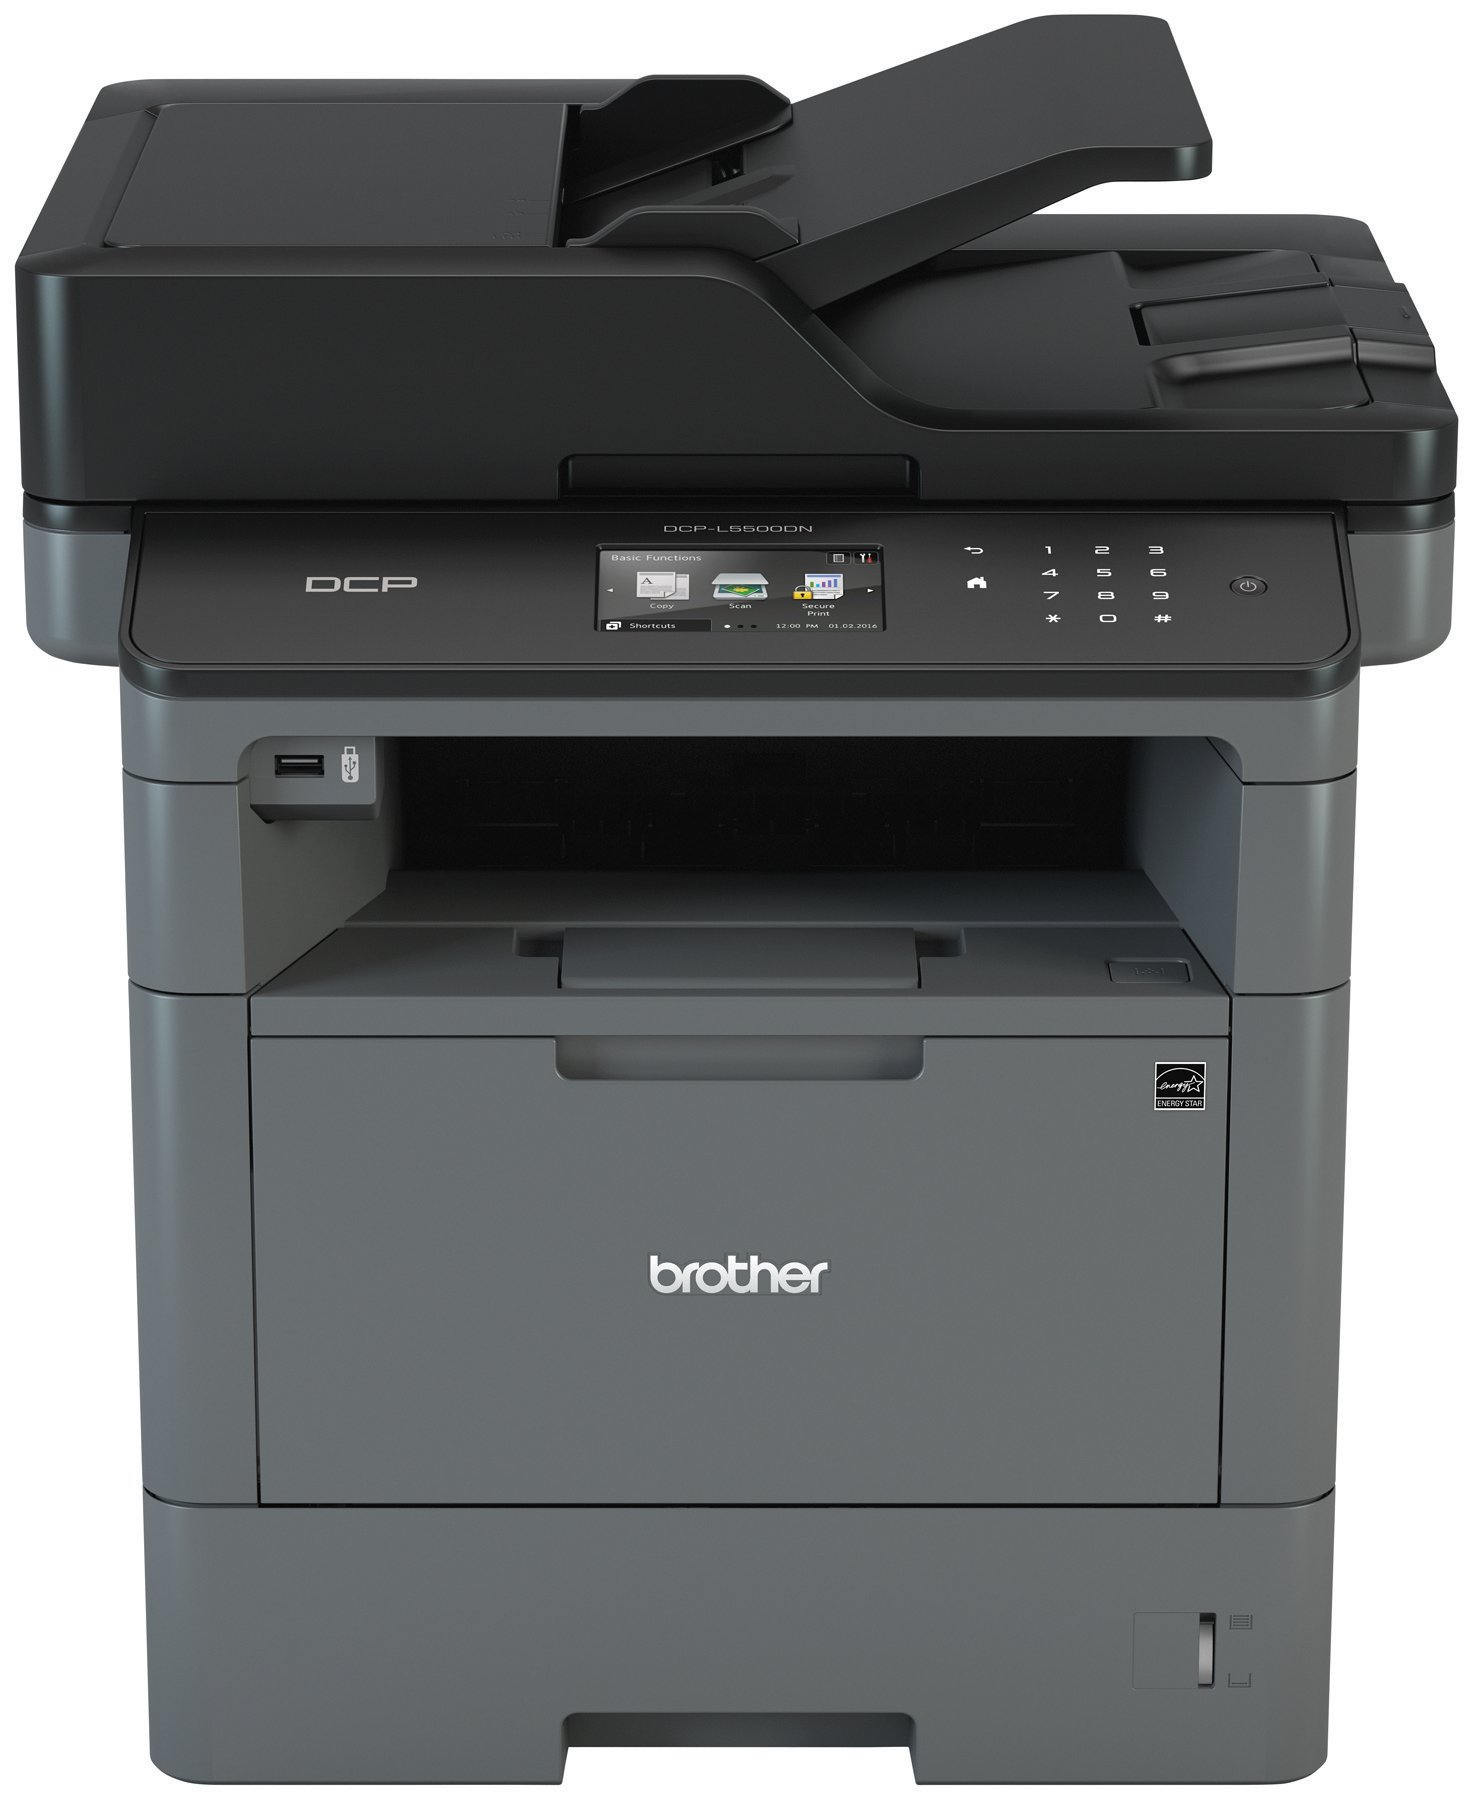 Book Cover Brother Monochrome Laser Printer, Multifunction Printer and Copier, DCP-L5500DN, Flexible Network Connectivity, Duplex Printing, Mobile Printing & Scanning, Amazon Dash Replenishment Ready